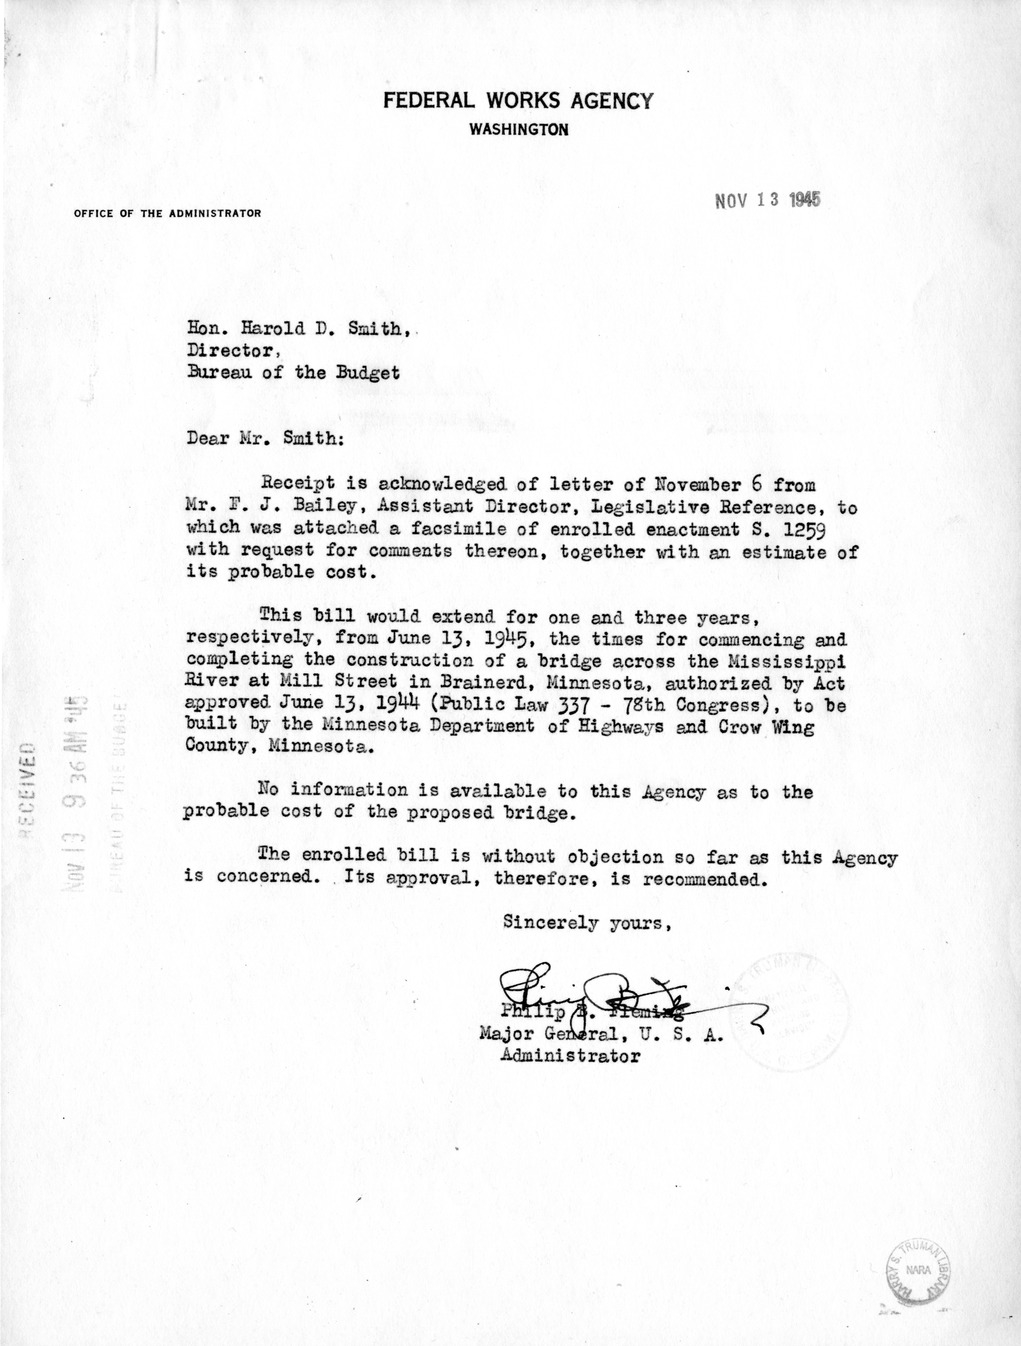 Memorandum from Frederick J. Bailey to M. C. Latta, S. 1259, To Extend the Times for Commencing and Completing the Construction of a Bridge Across the Mississippi River at Mill Street in Brainerd, Minnesota, with Attachments